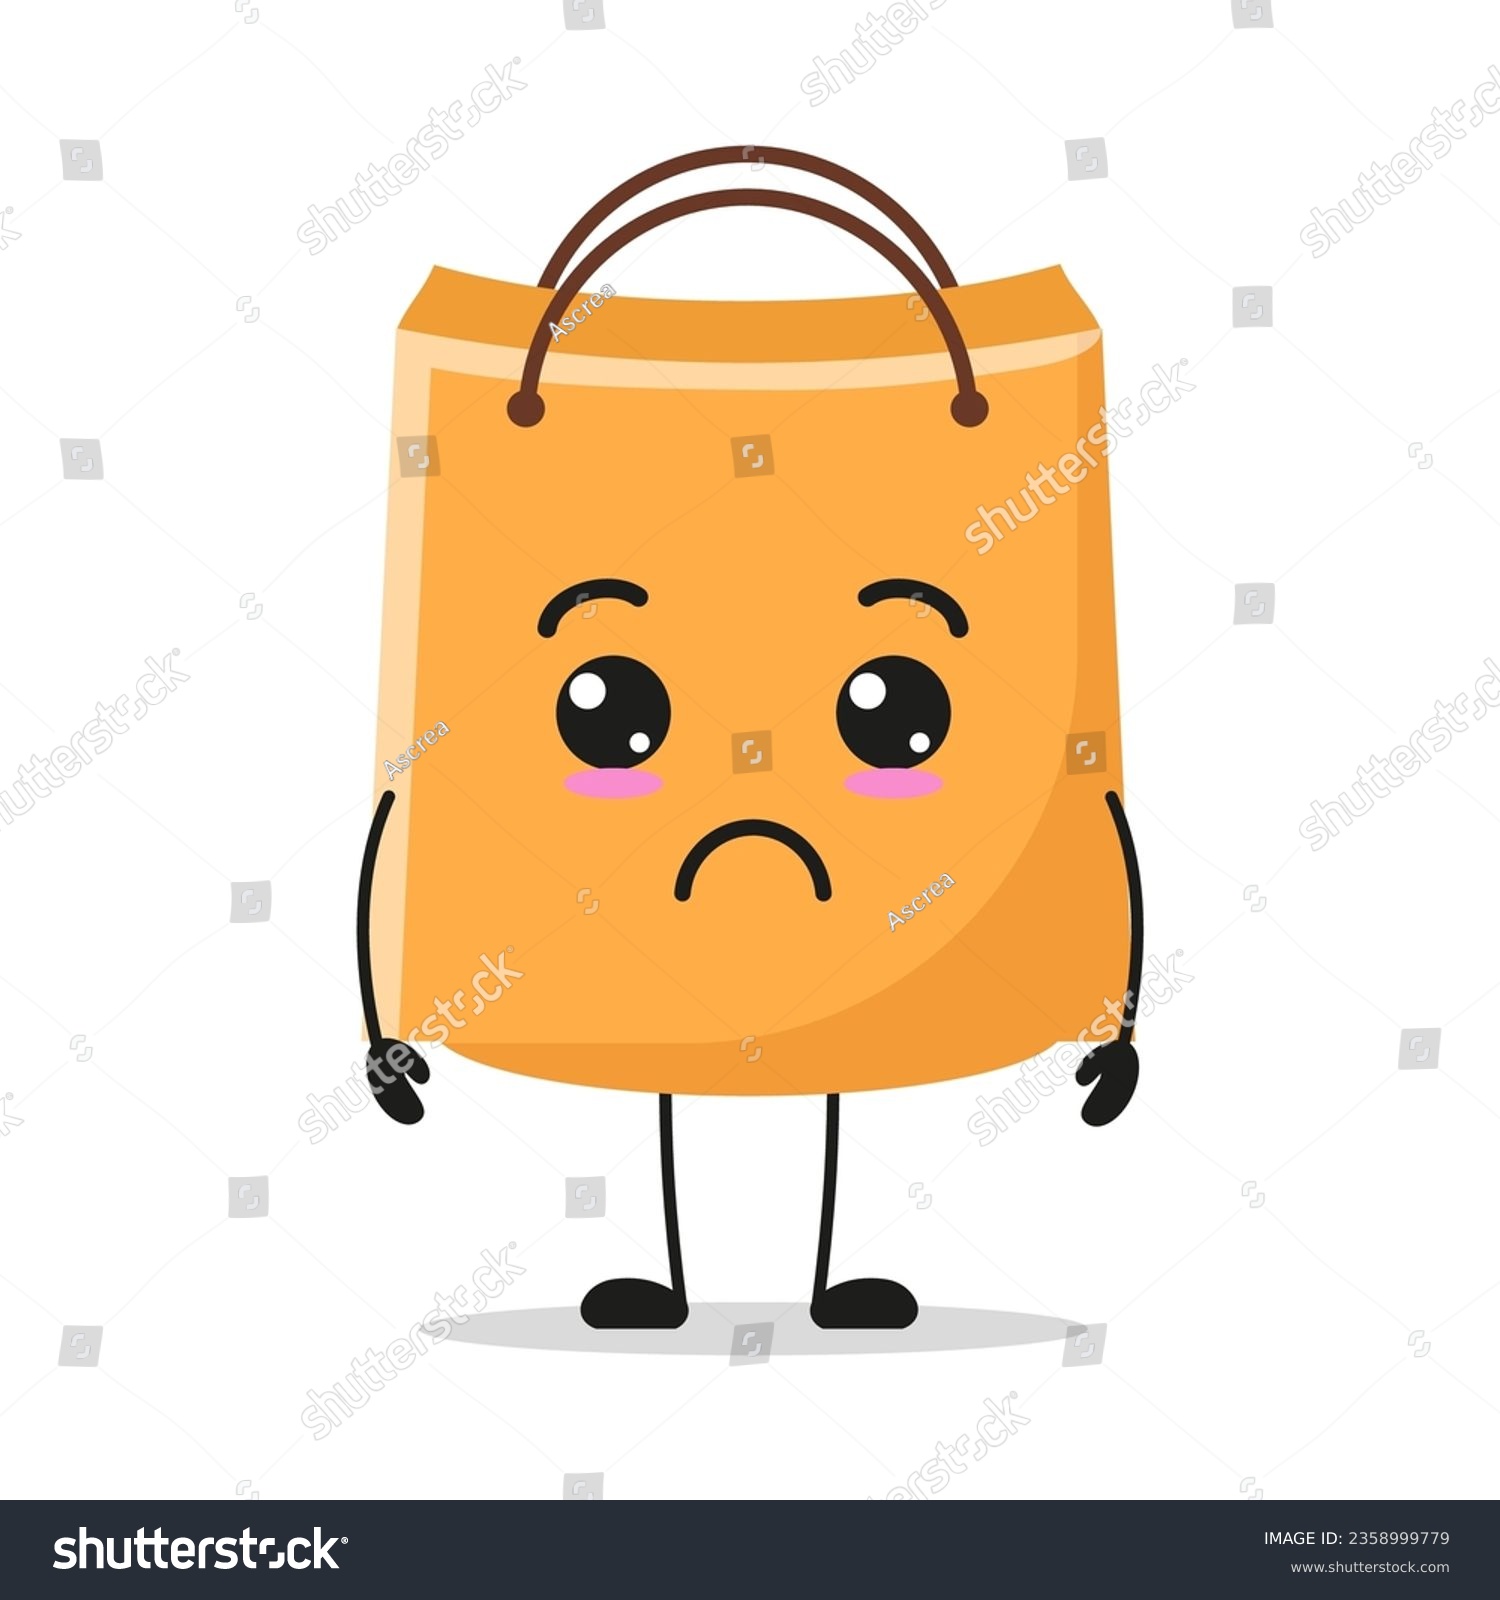 SVG of Cute sad shopping bag character. Funny unhappy paper bag cartoon emoticon in flat style. bag emoji vector illustration svg